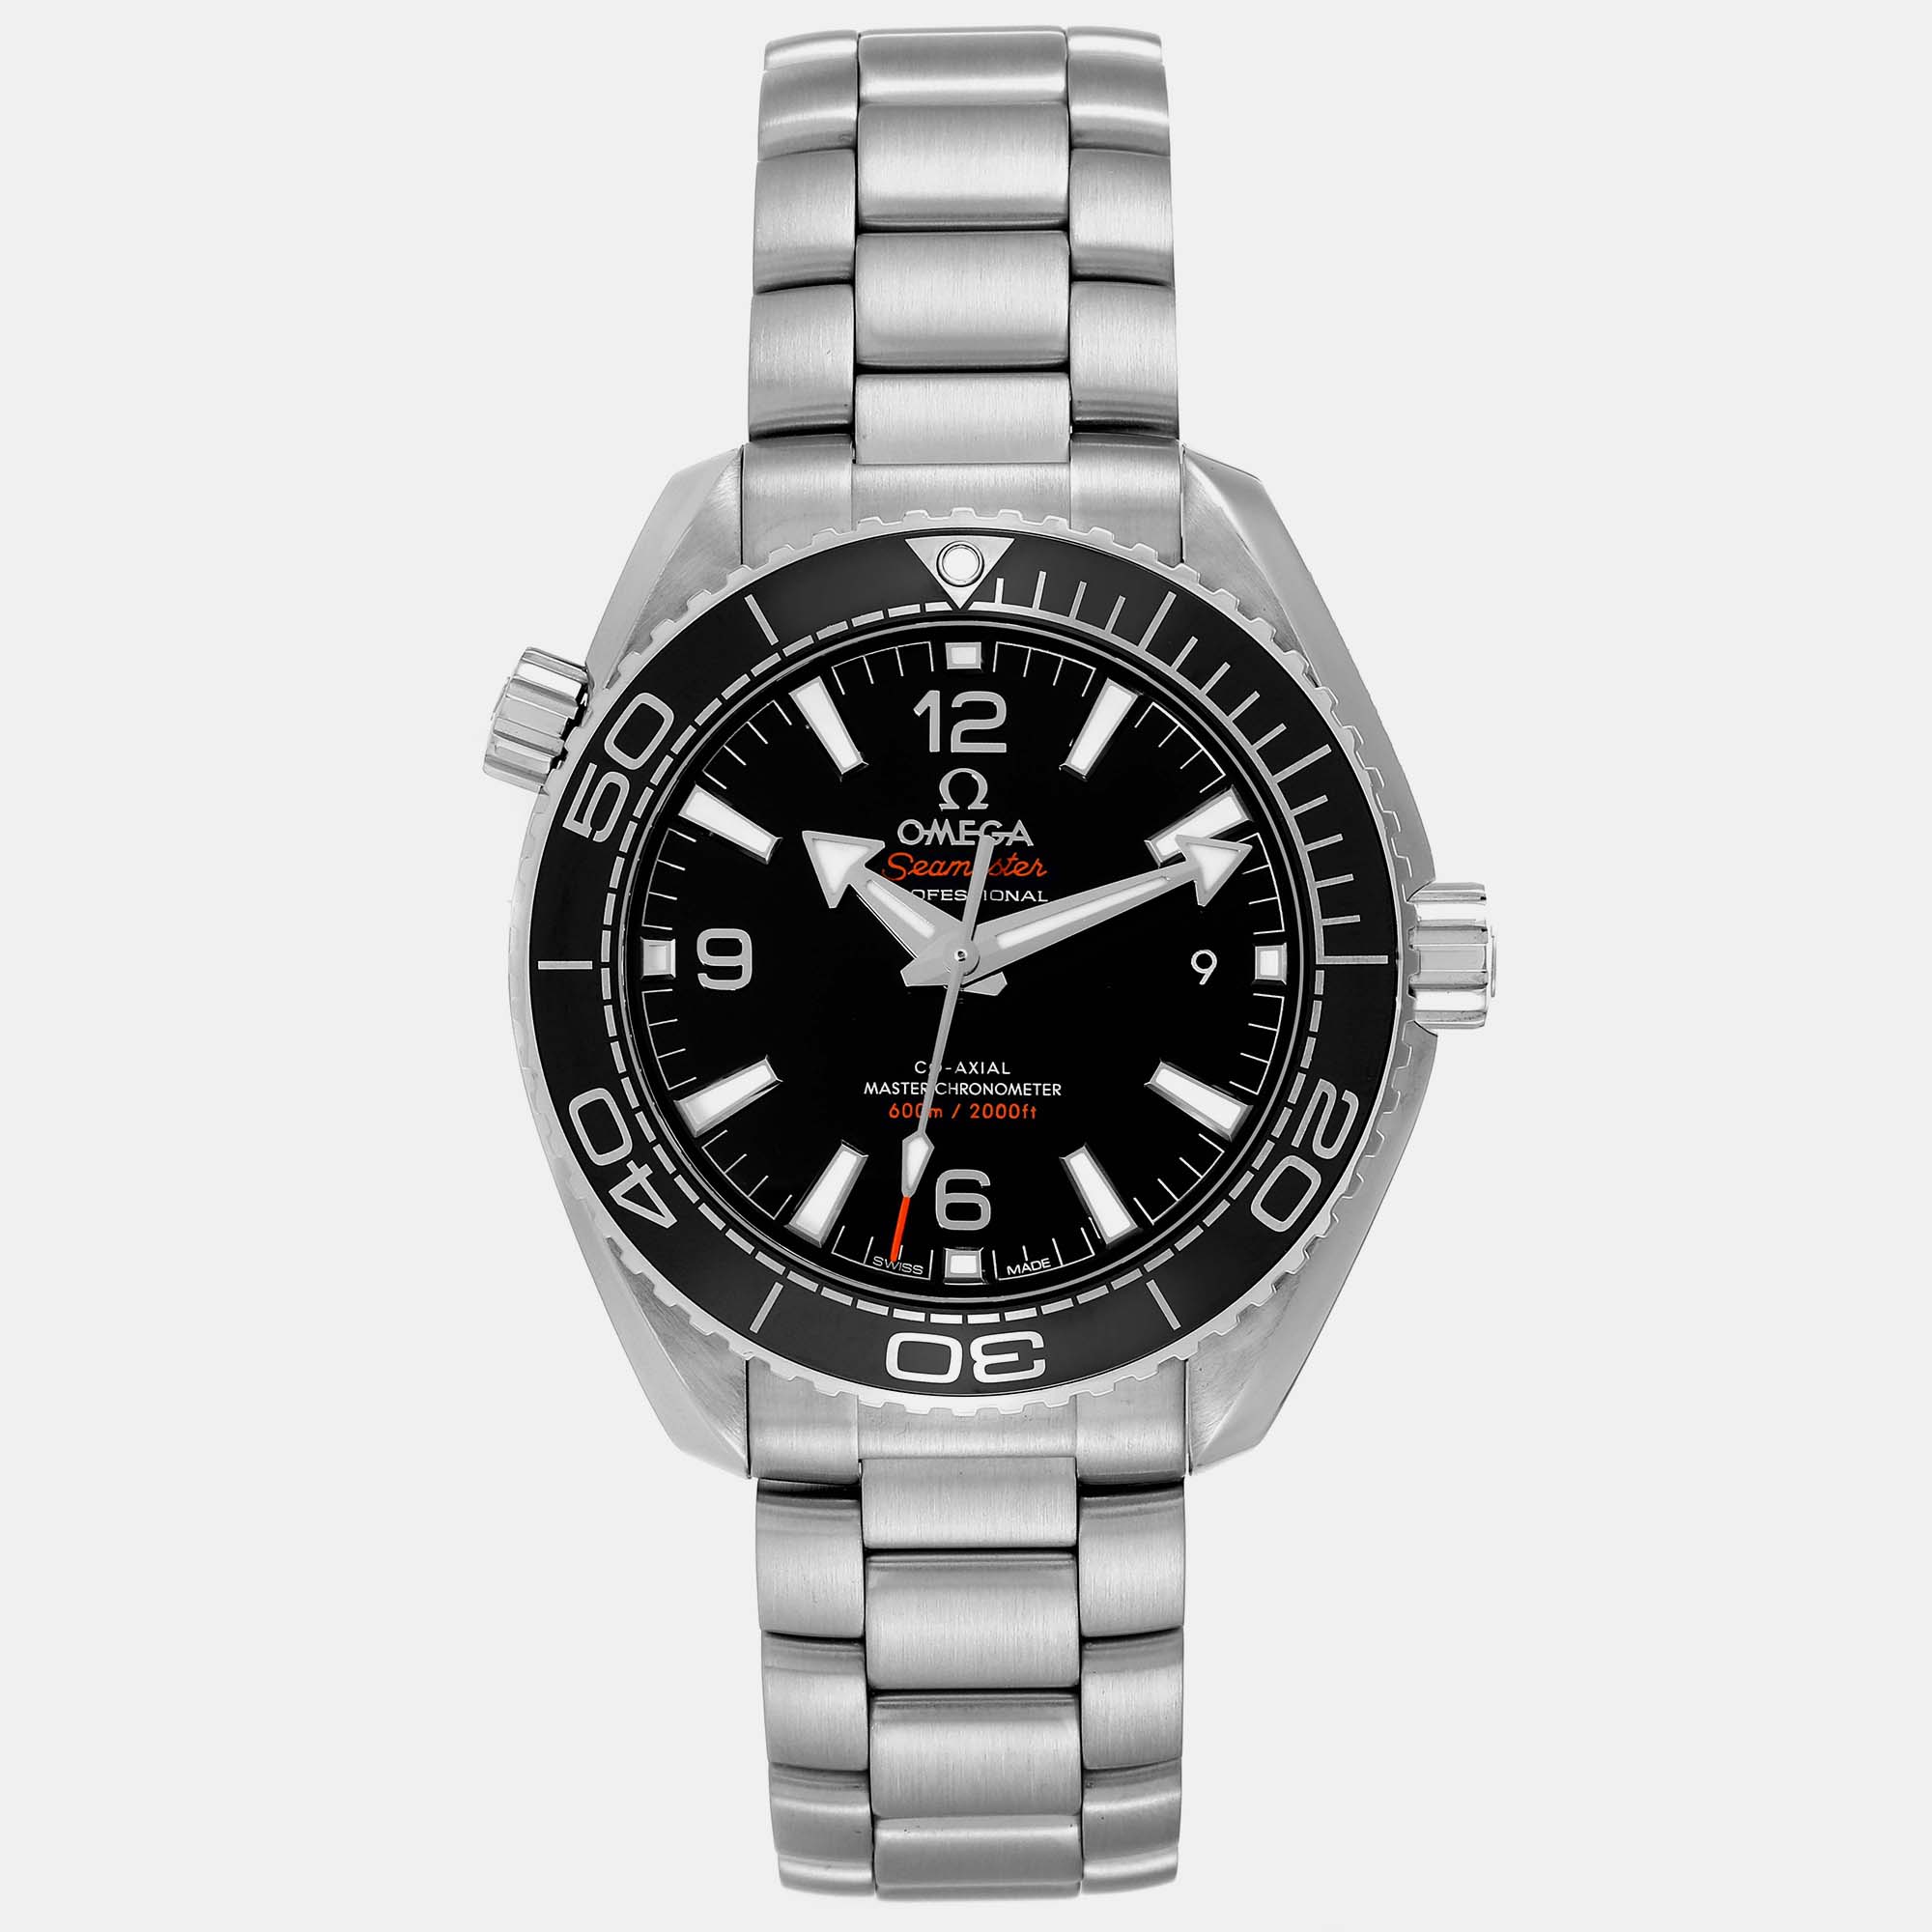 Omega black stainless steel seamaster planet ocean 215.30.40.20.01.001 automatic men's wristwatch 39.5 mm